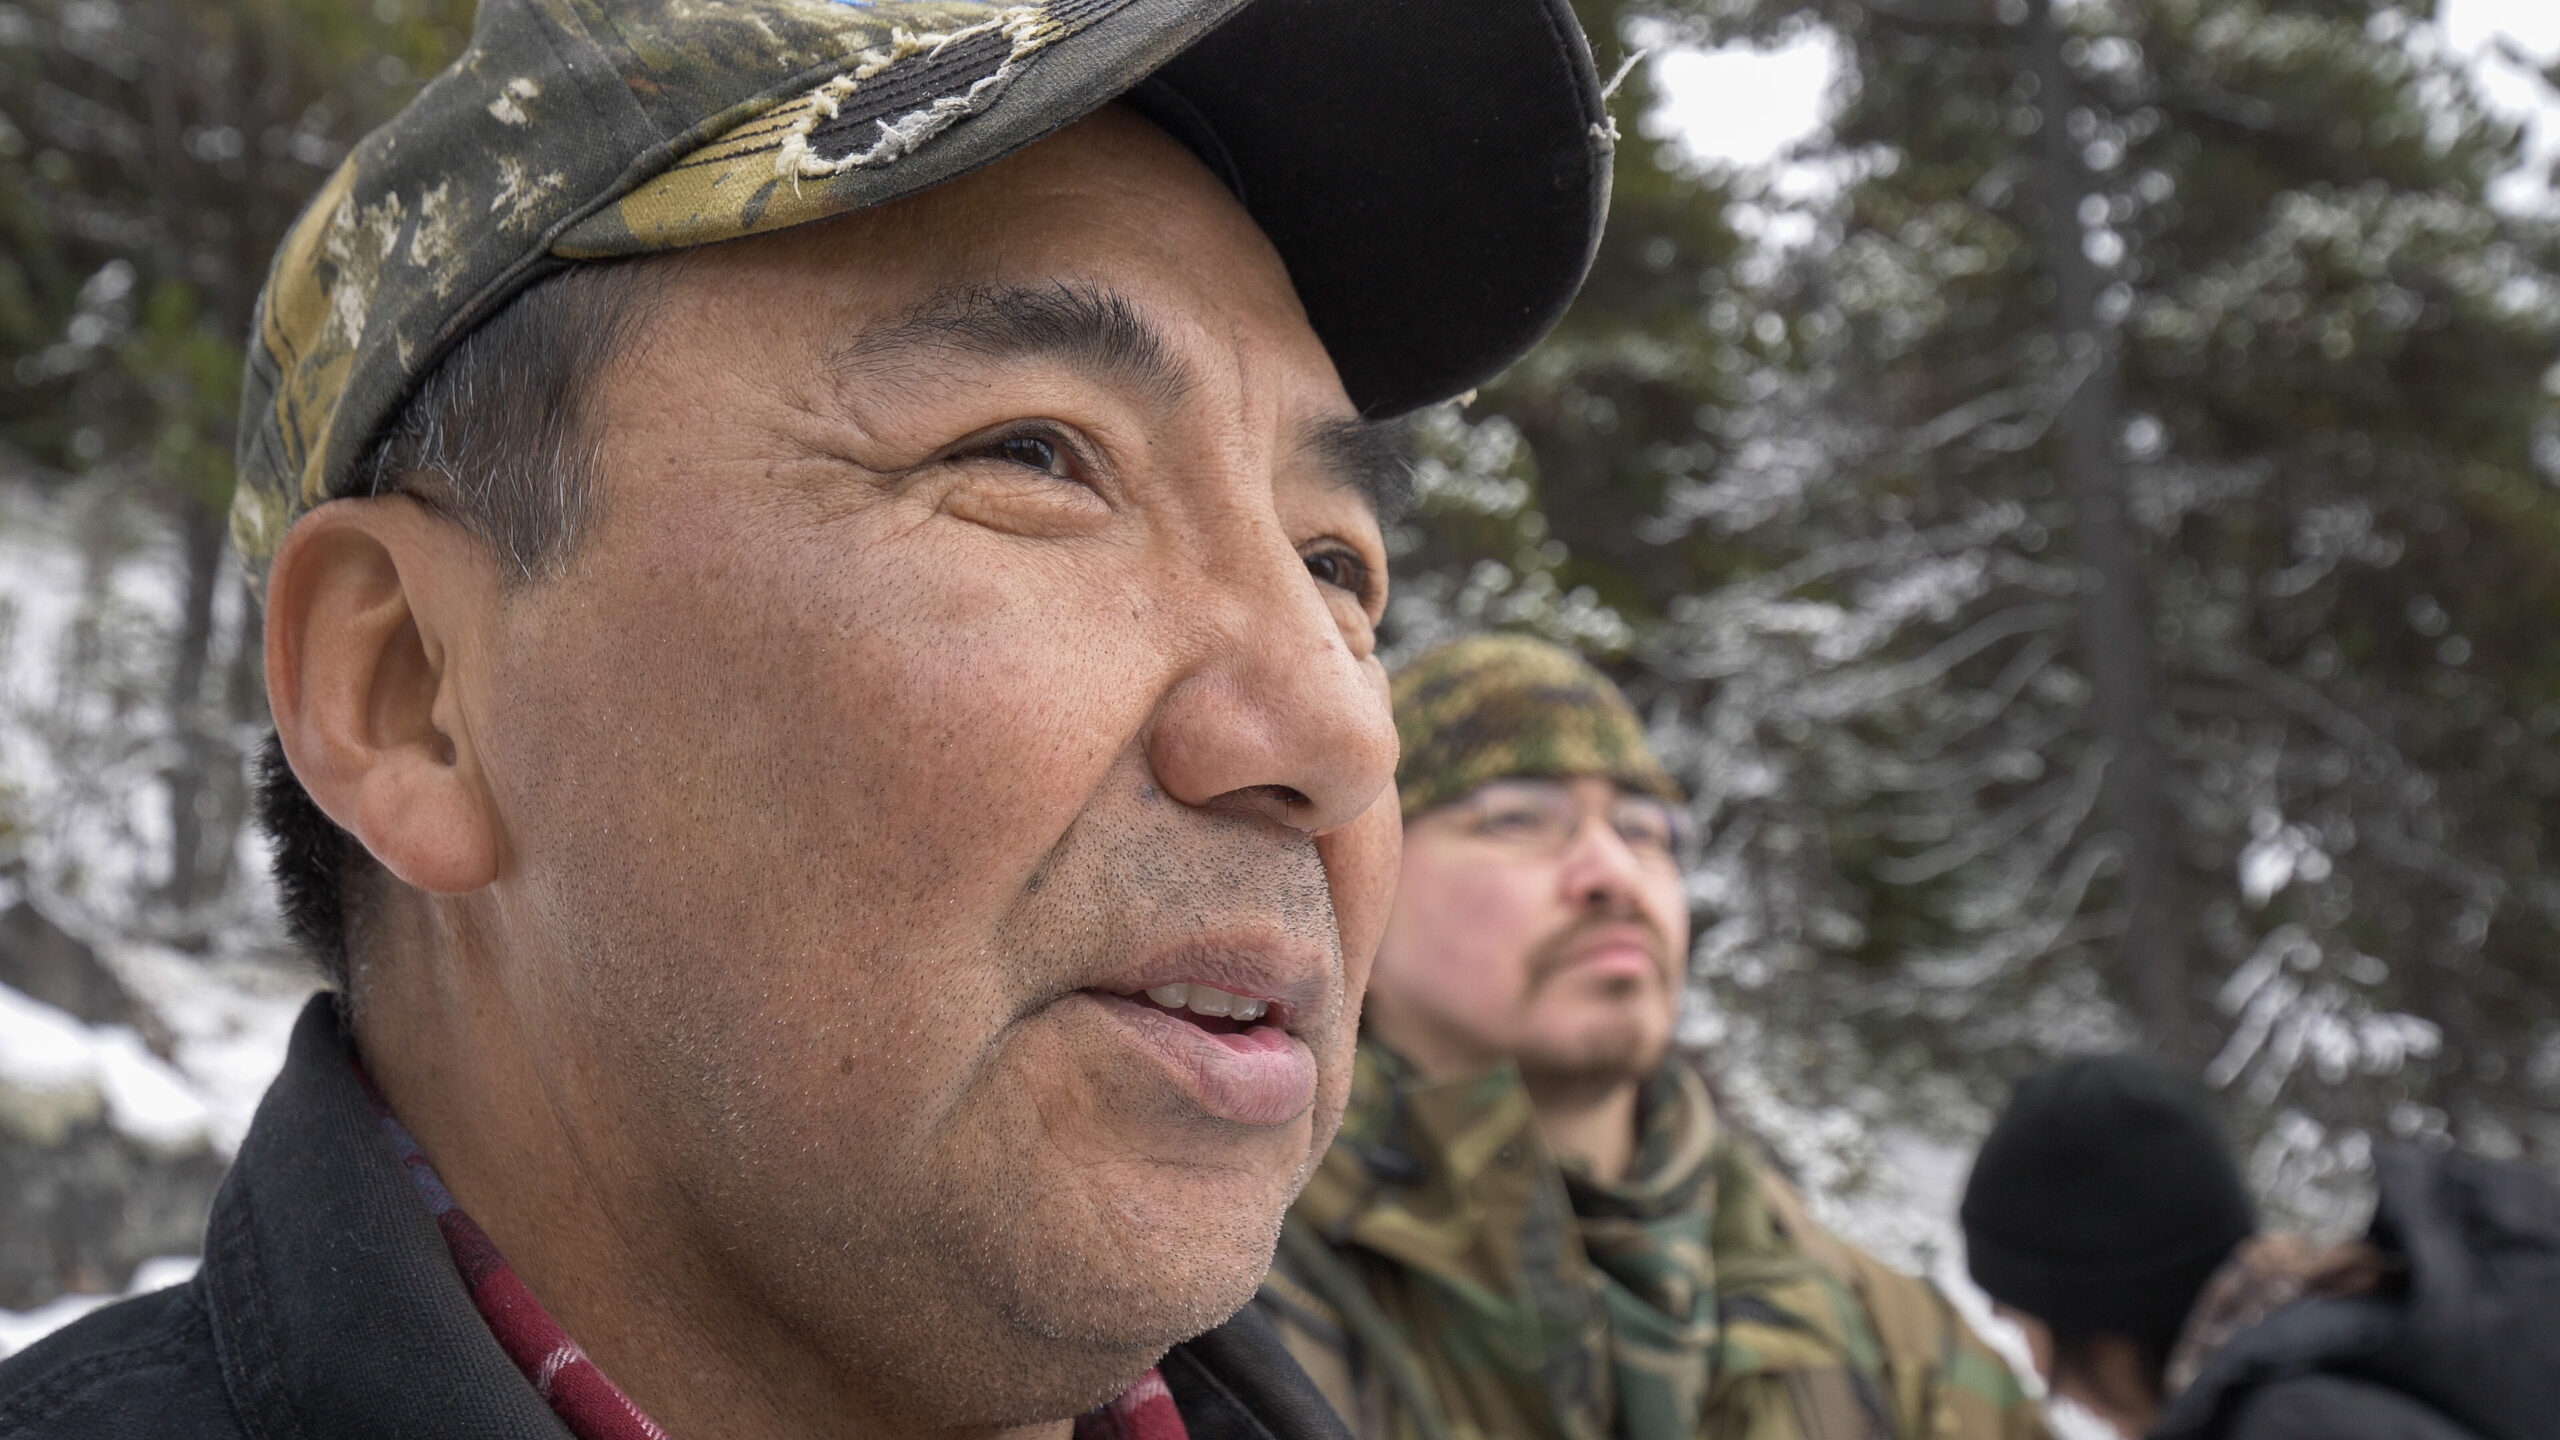 Klabona Keeper John Nole said he was told about the first blockade while on stage at a local music festival. He then spent years on the frontlines, fighting to protect Tahltan land and water.